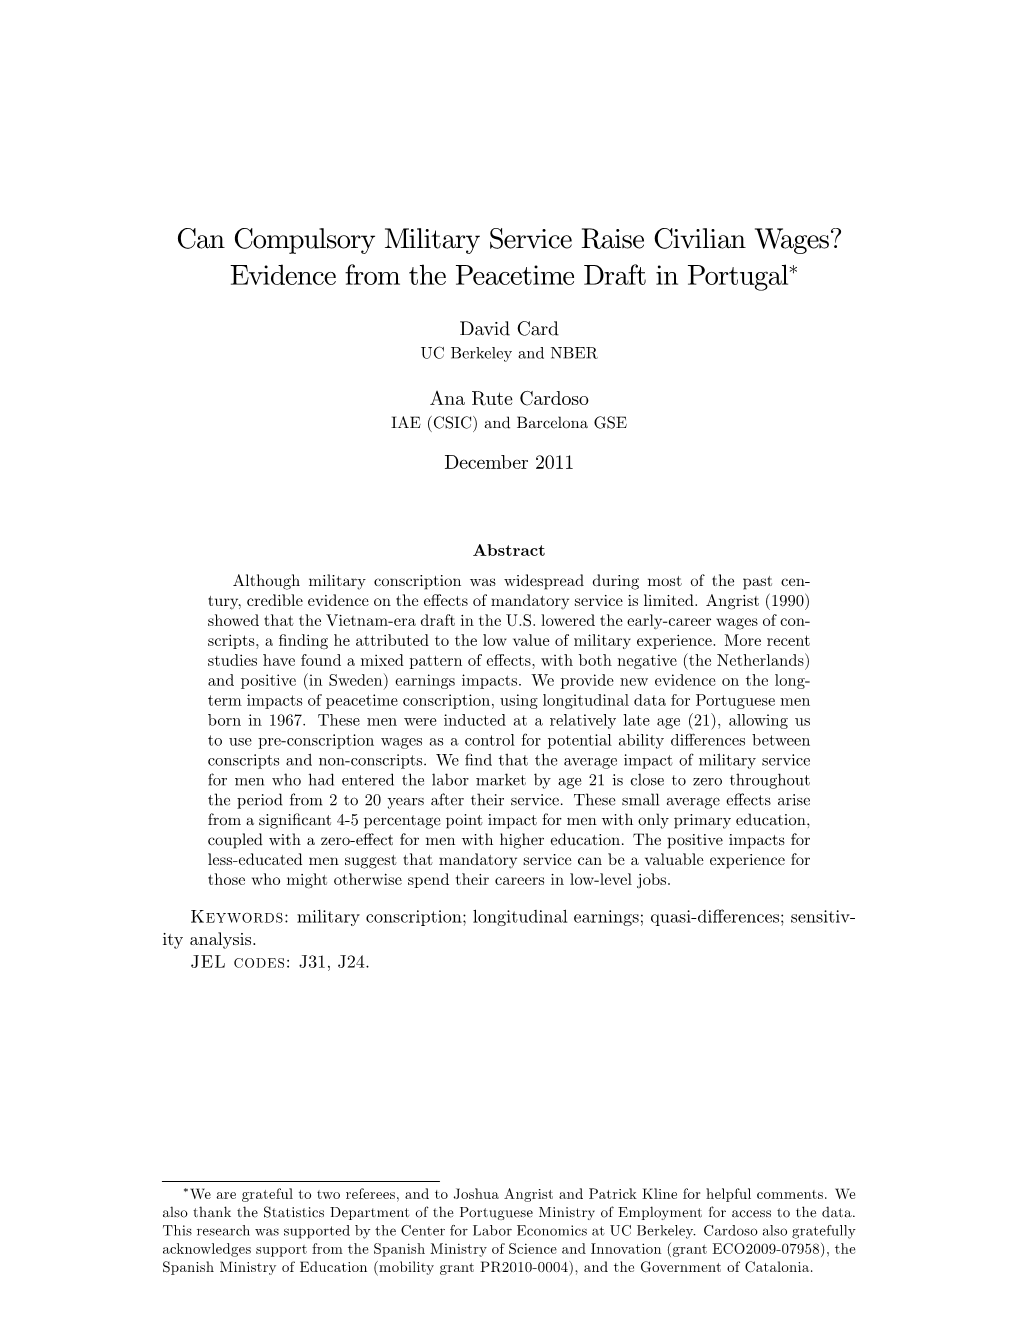 Can Compulsory Military Service Raise Civilian Wages? Evidence from the Peacetime Draft in Portugal∗